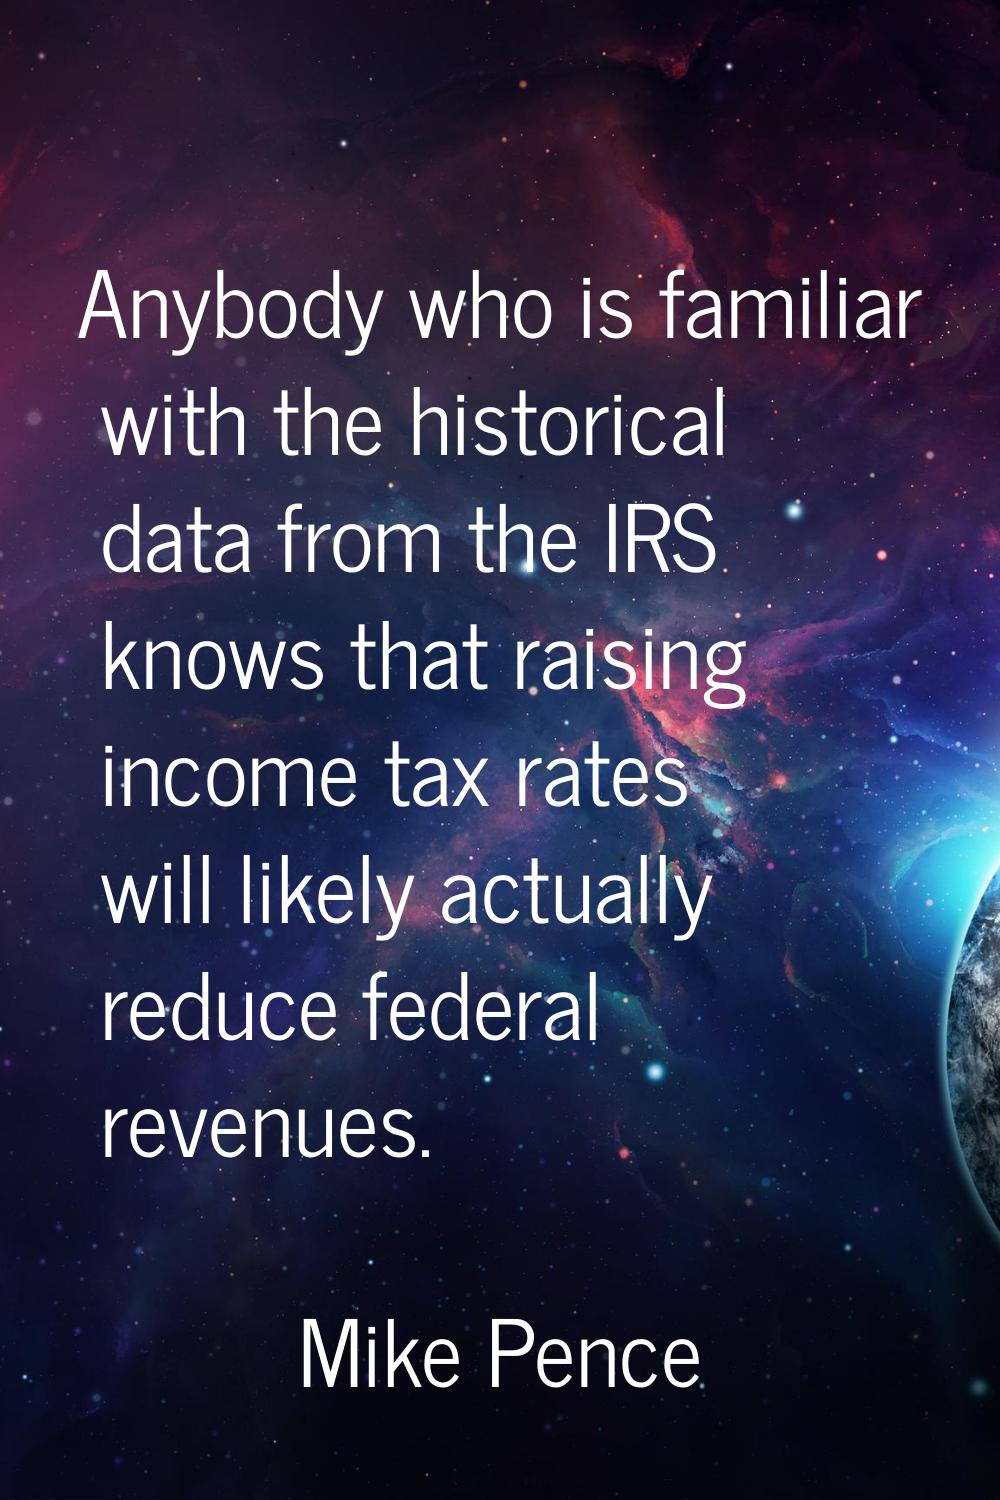 Anybody who is familiar with the historical data from the IRS knows that raising income tax rates w